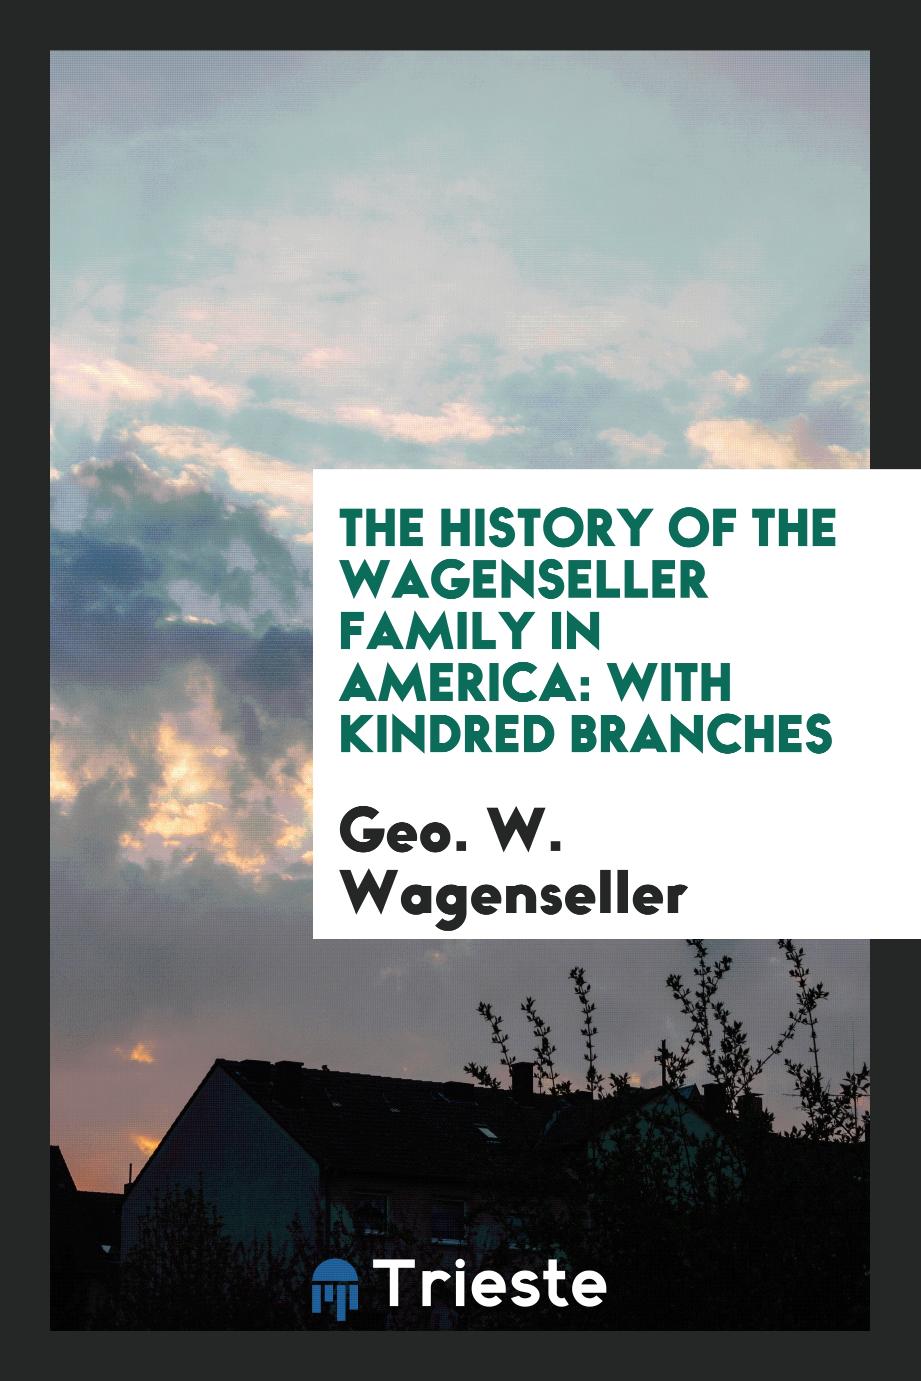 The History of the Wagenseller Family in America: With Kindred Branches